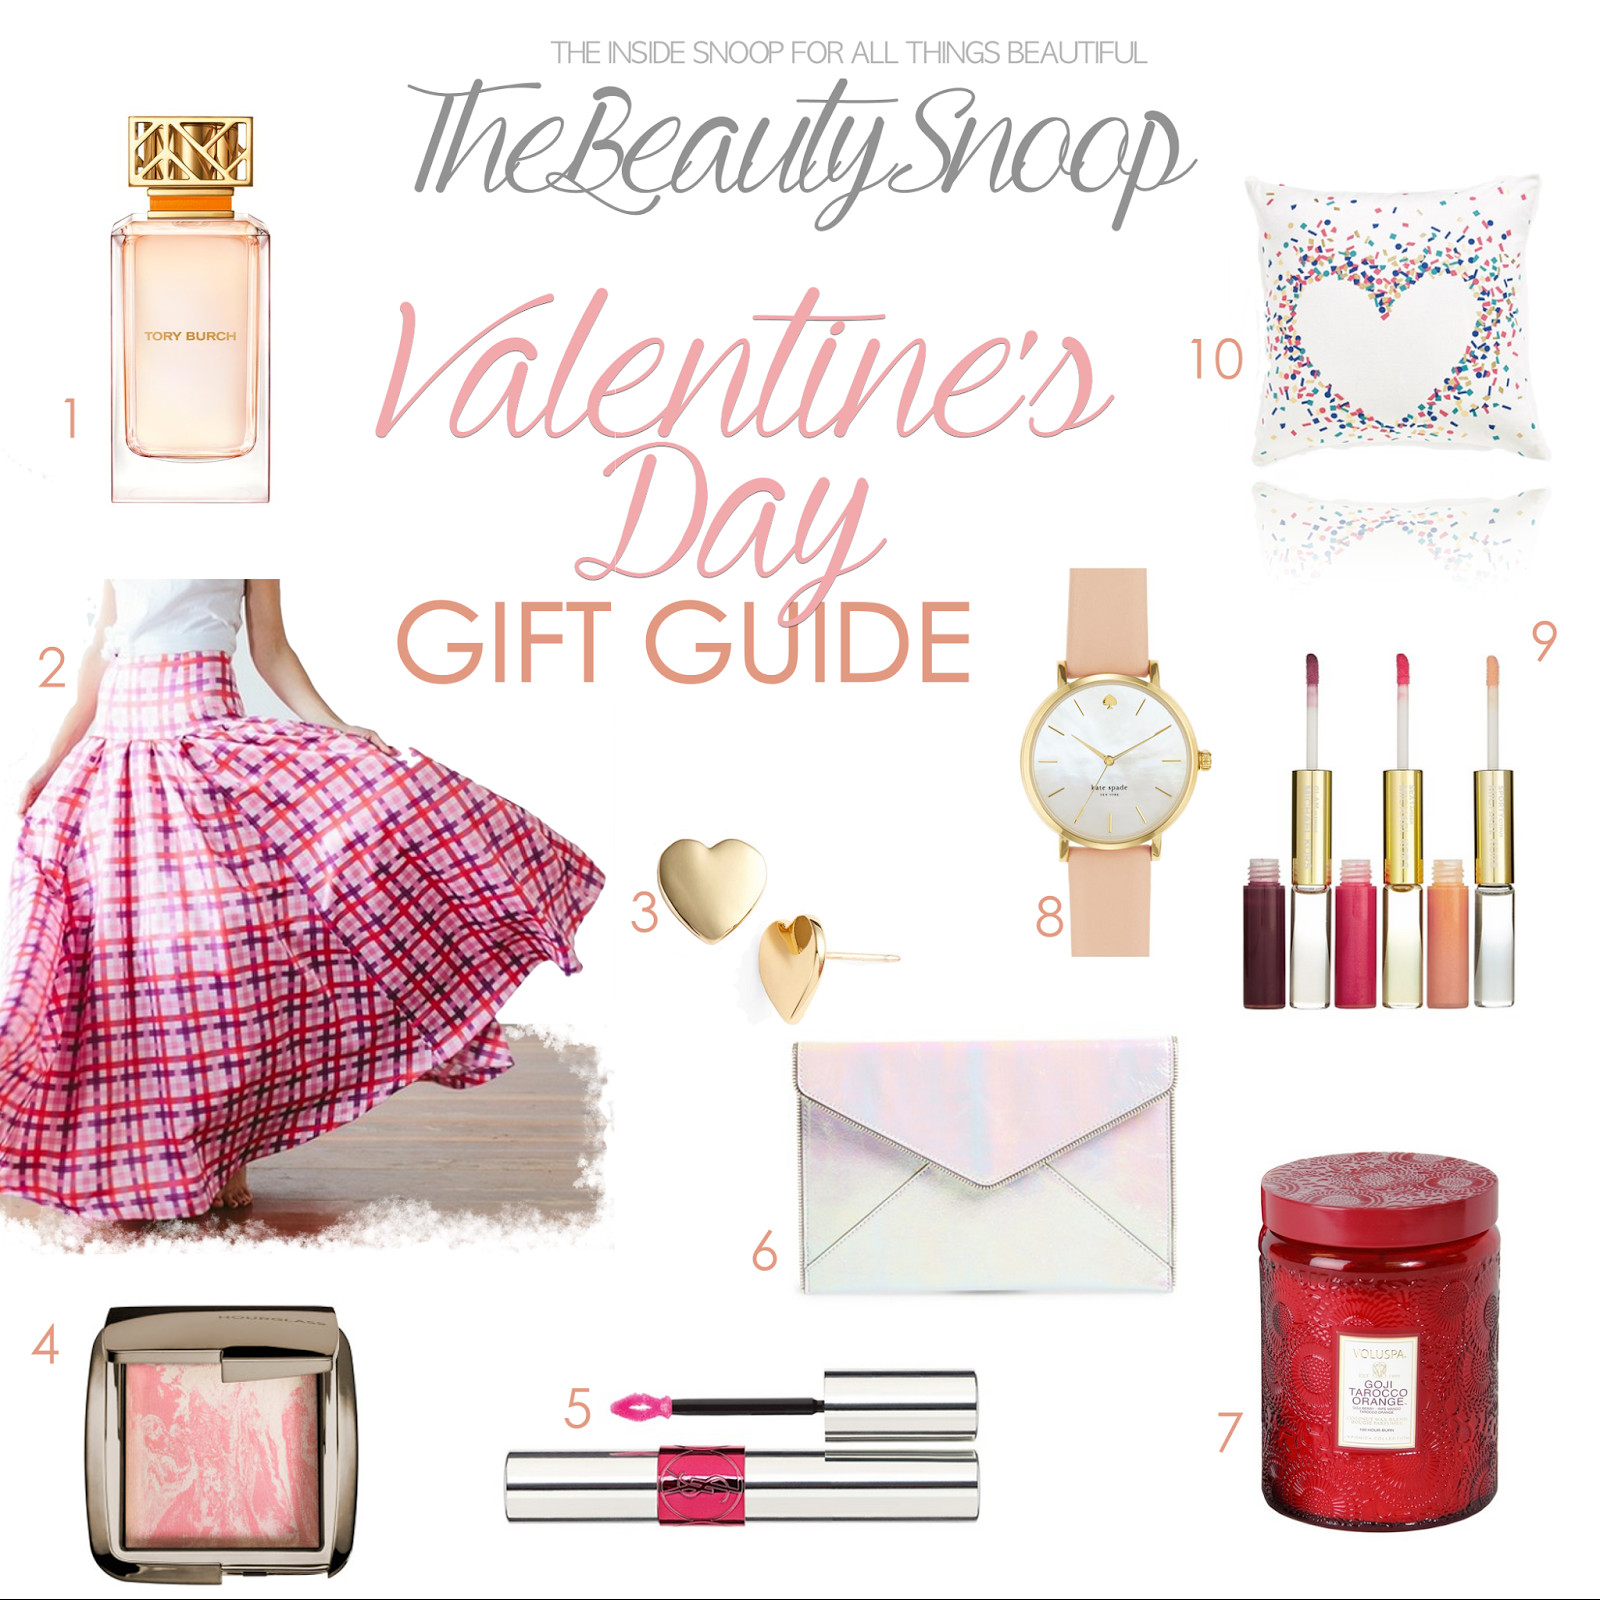 Last Minute Valentines Gift Ideas
 THE BEAUTY SNOOP LAST MINUTE VALENTINE S DAY GIFT IDEAS